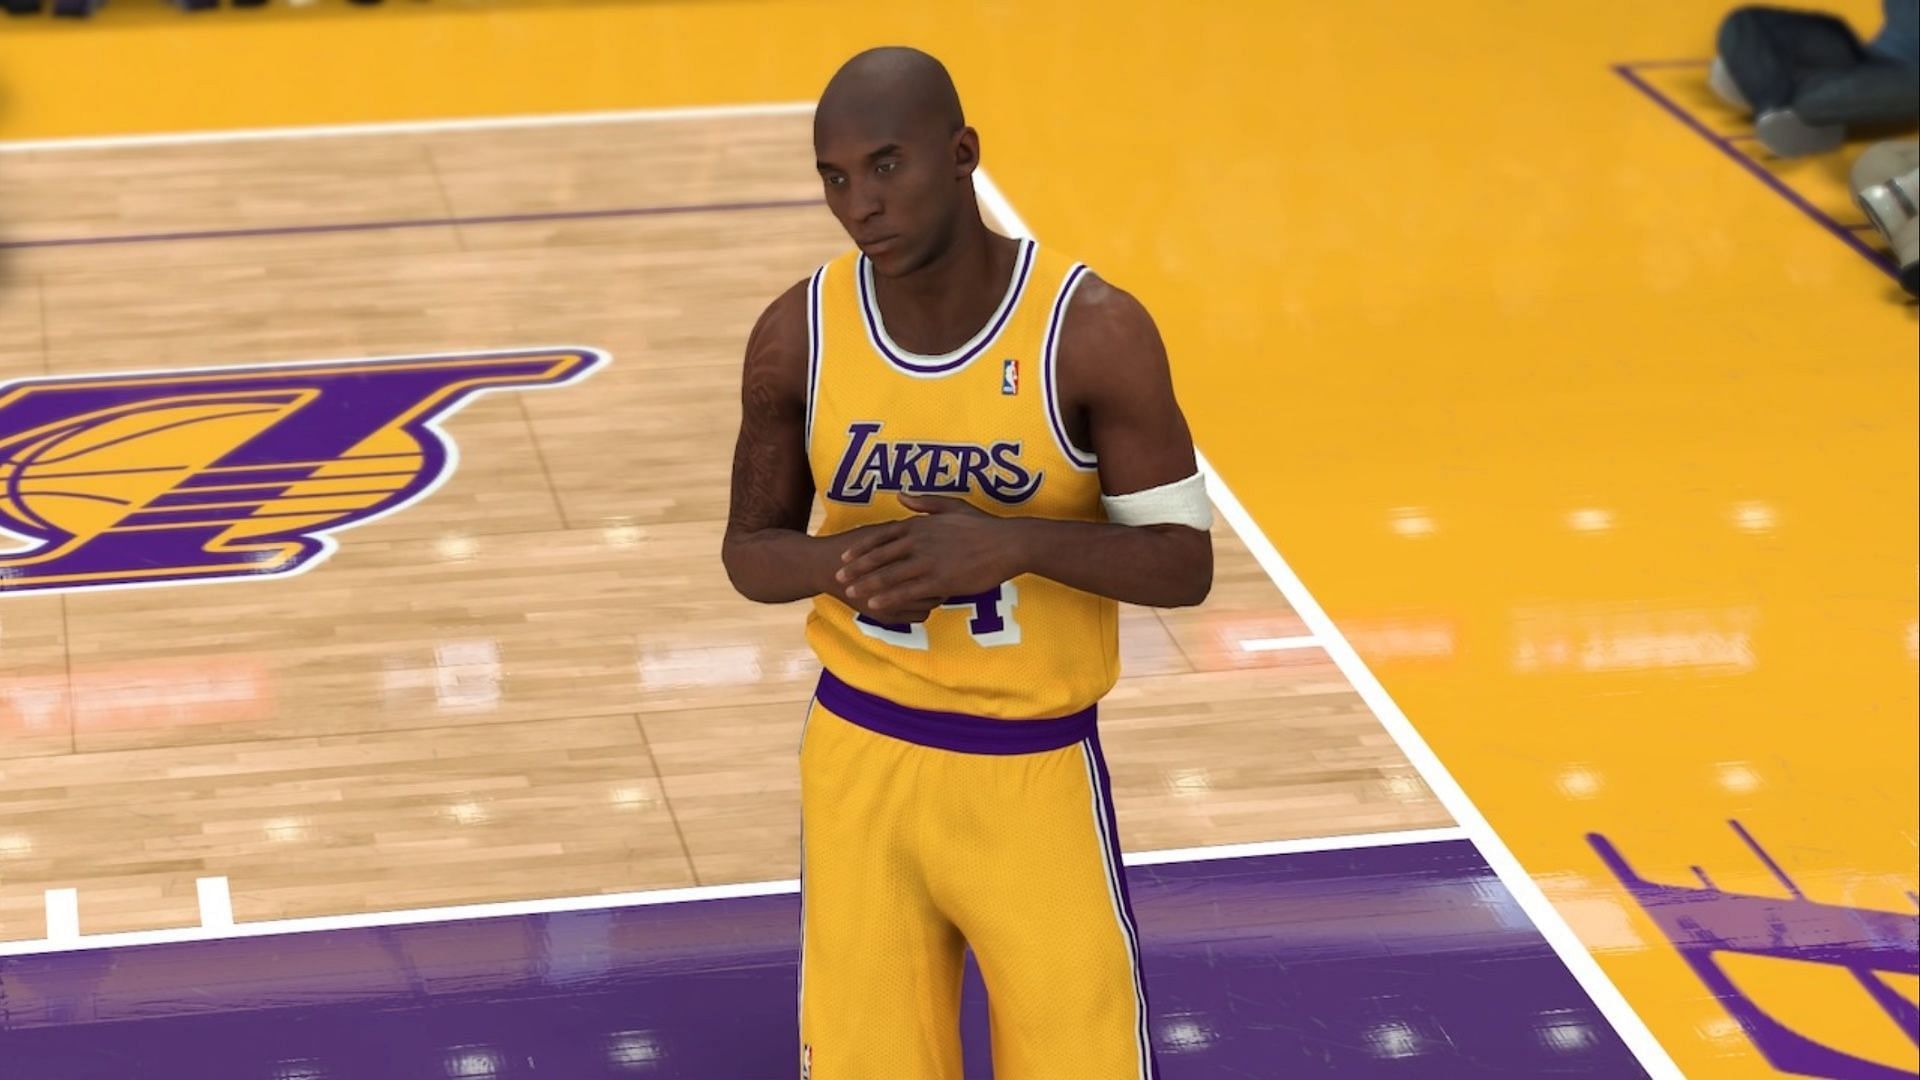 Kobe Bryant is rumored to be presented as a cover icon (Image via 2K Sports)